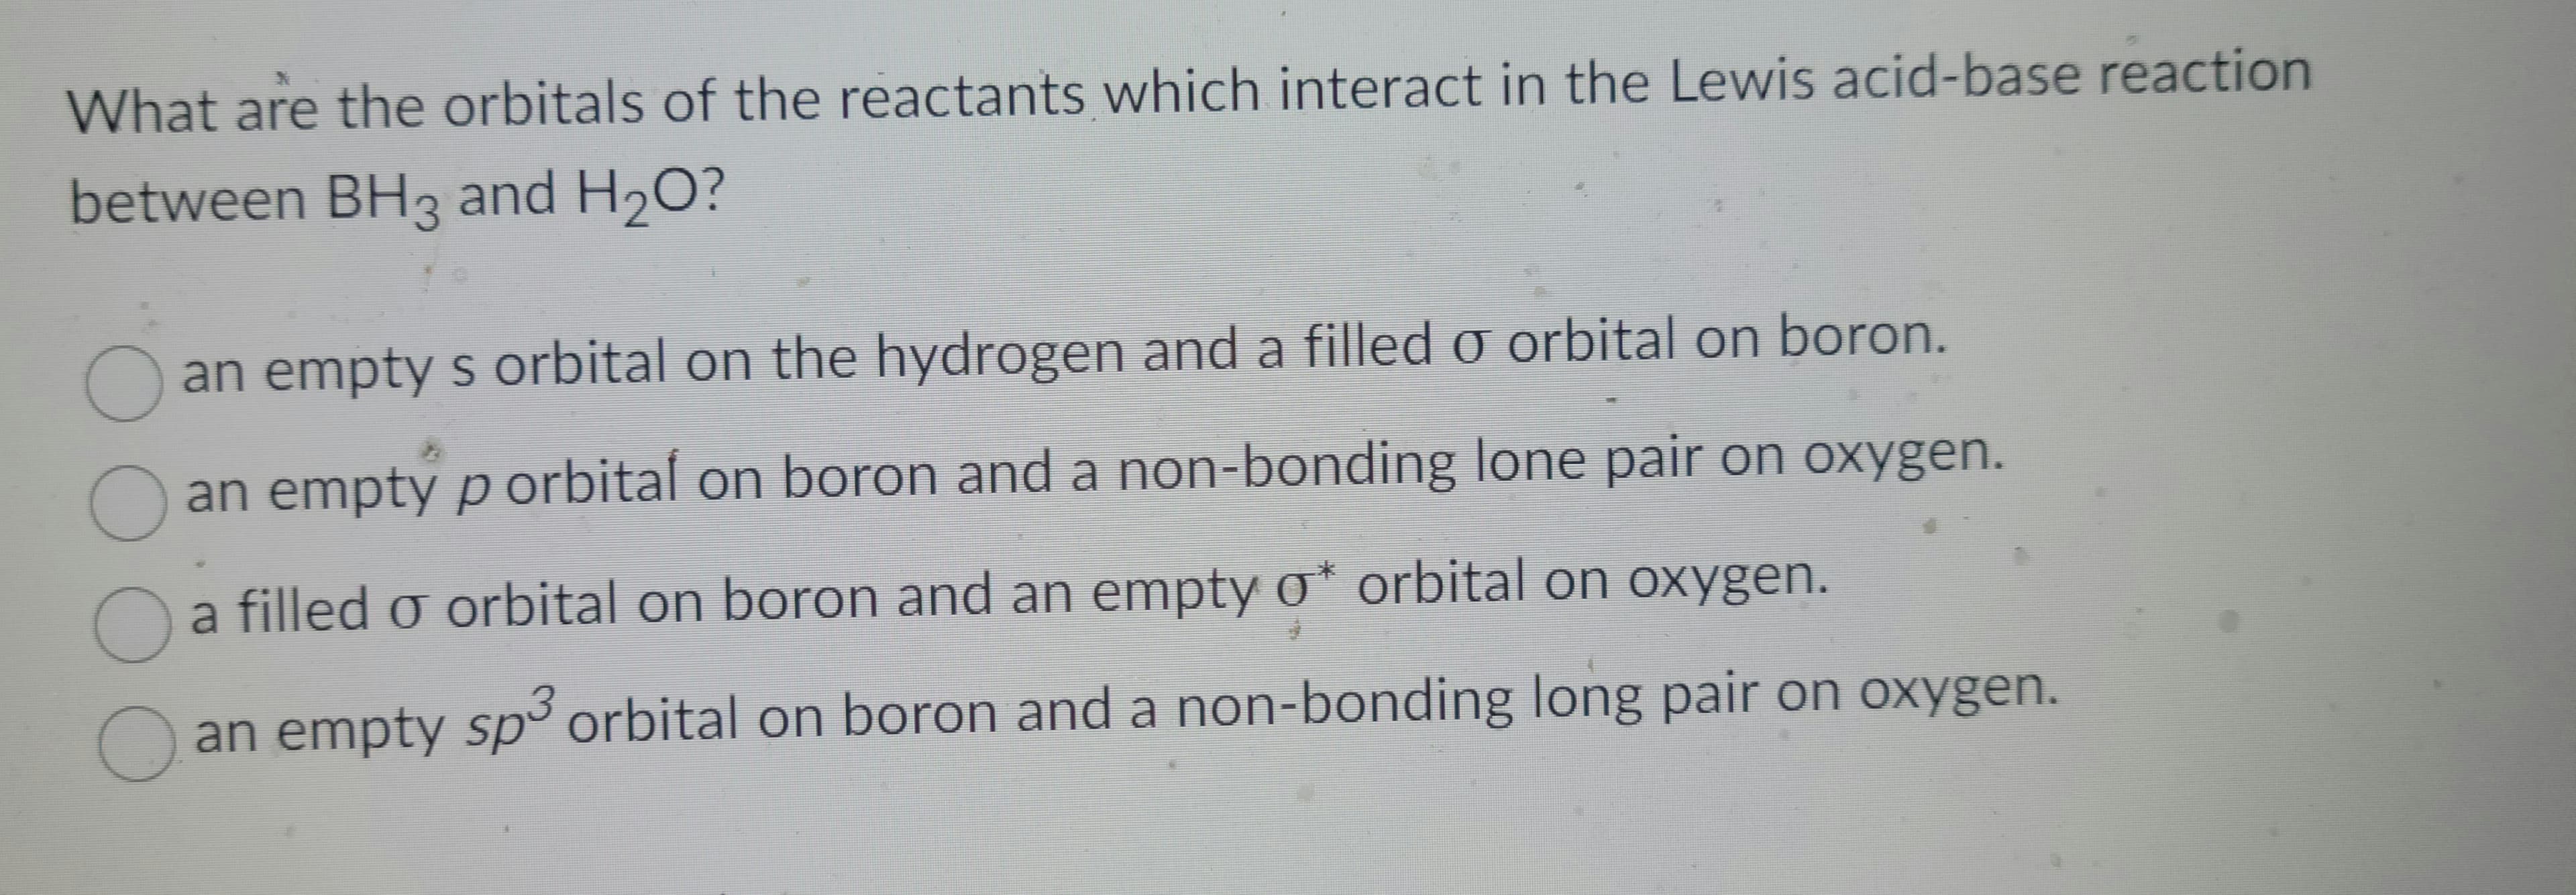 What are the orbitals of the reactants which interact in the Lewis acid-base reaction
between BH3 and H₂O?
000
an empty s orbital on the hydrogen and a filled o orbital on boron.
an empty p orbital on boron and a non-bonding lone pair on oxygen.
a filled o orbital on boron and an empty σ* orbital on oxygen.
an empty sp³ orbital on boron and a non-bonding long pair on oxygen.